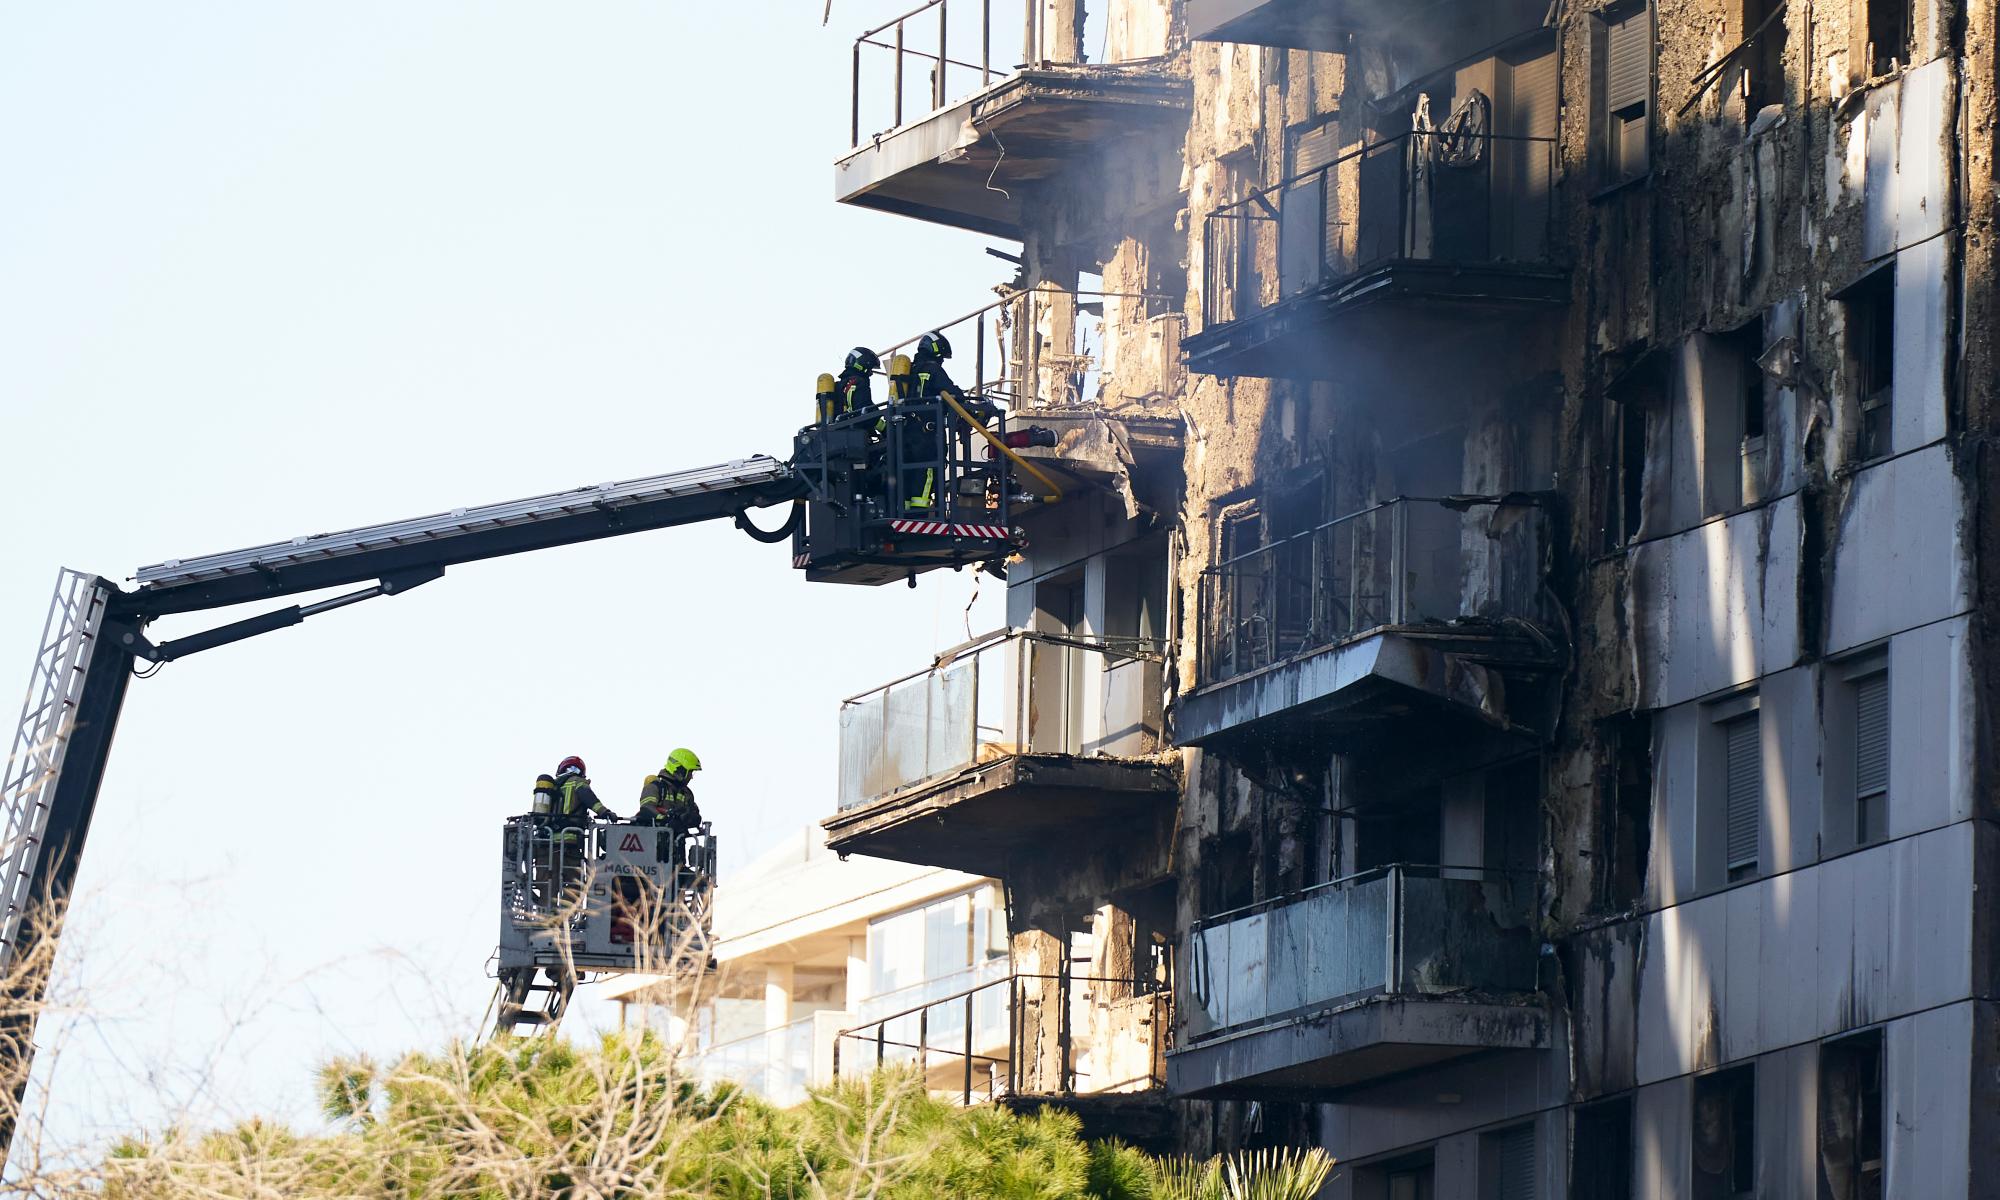 spain fire: up to 15 people still missing after valencia apartment block blaze